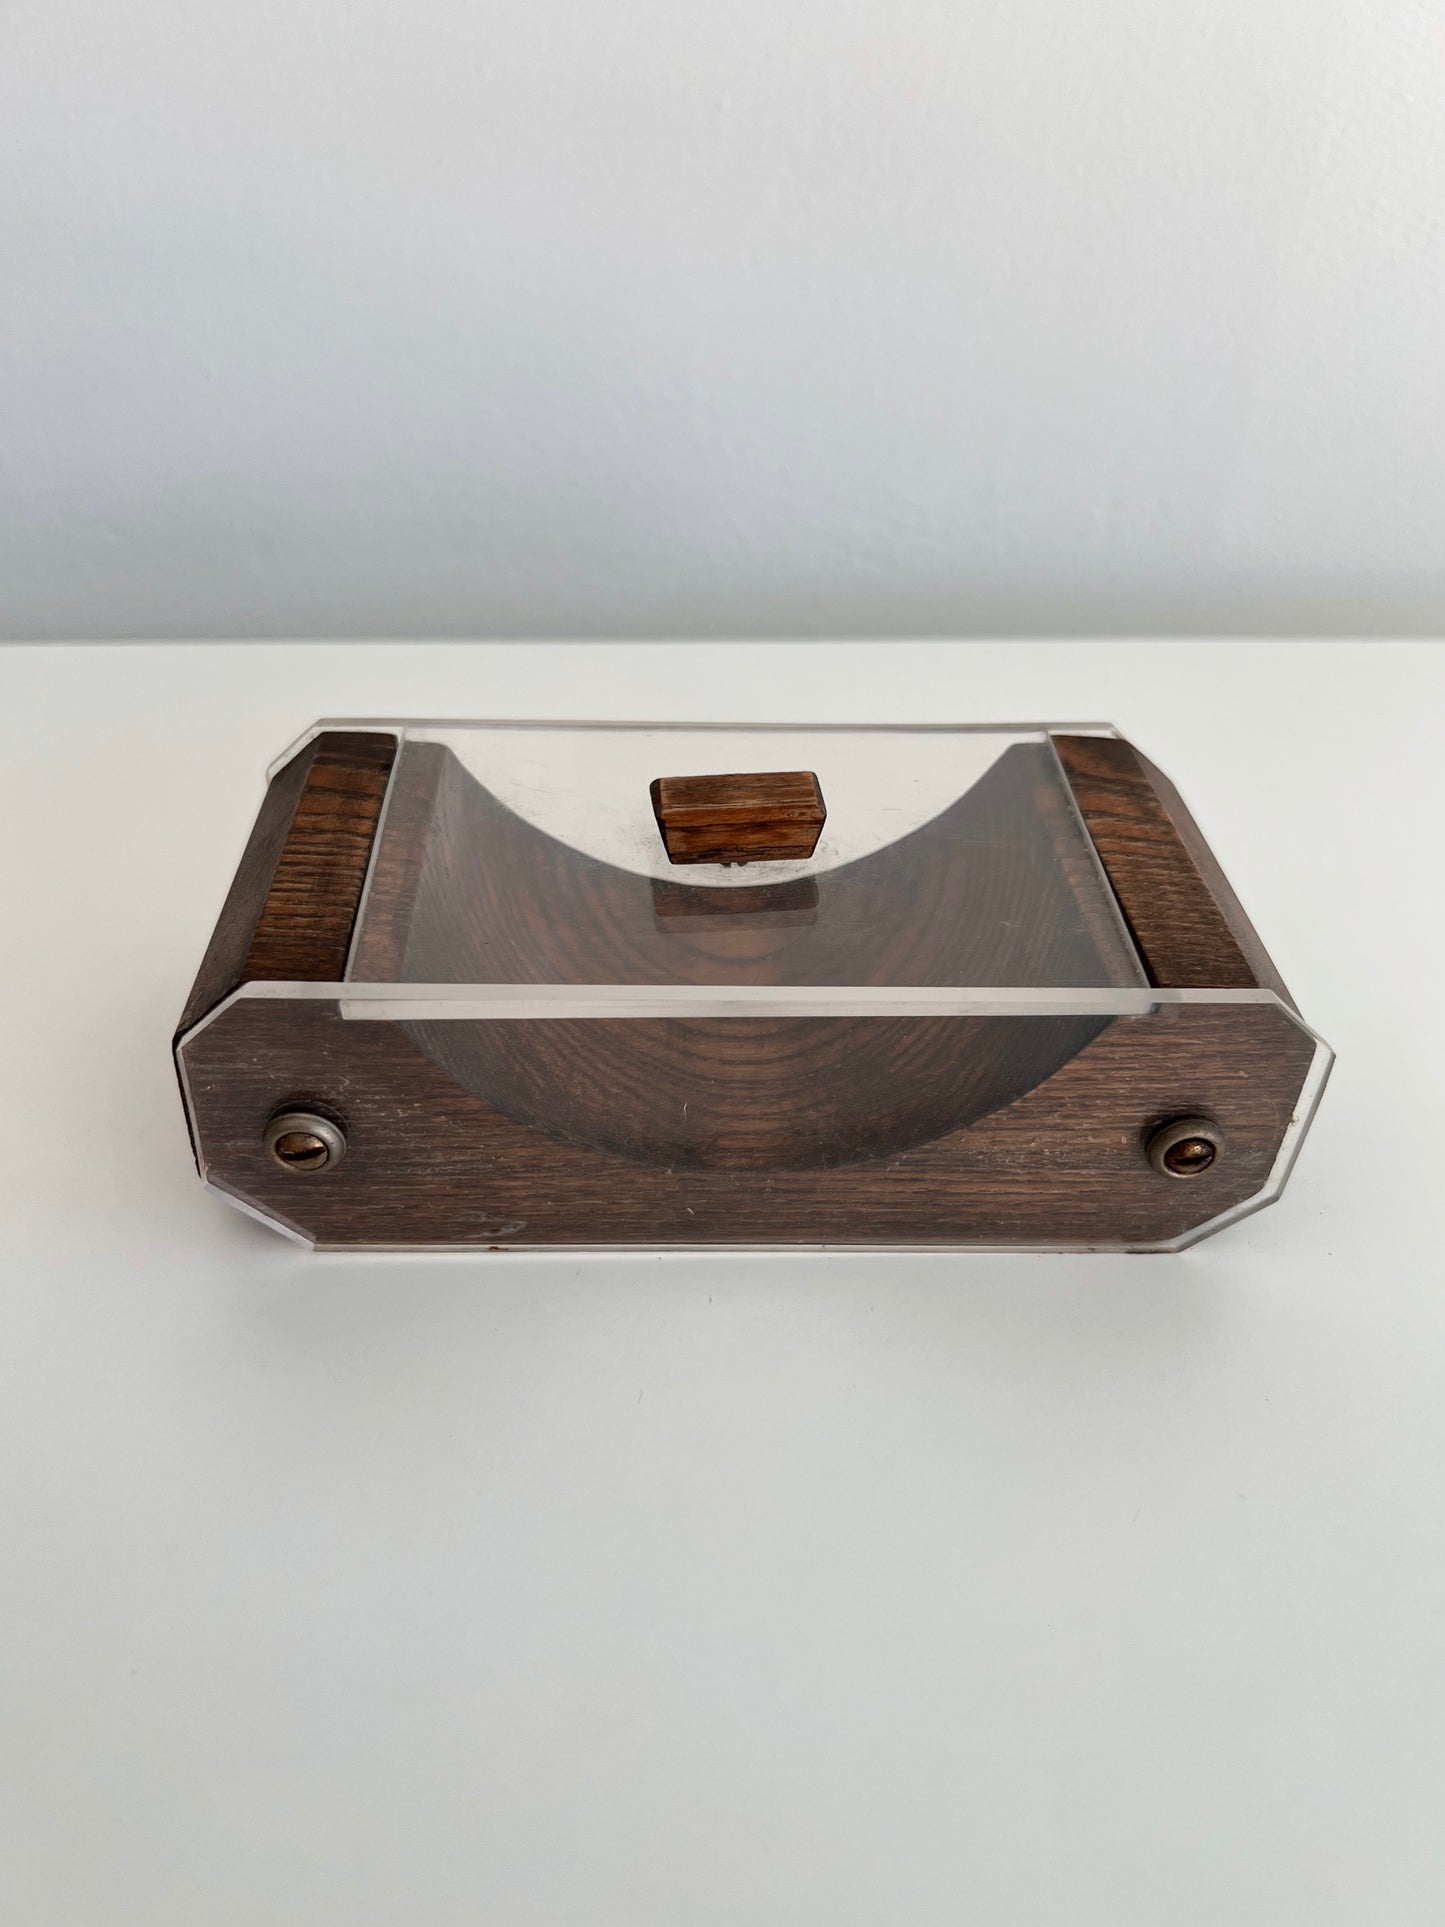 Wooden Box with Plastic Lid